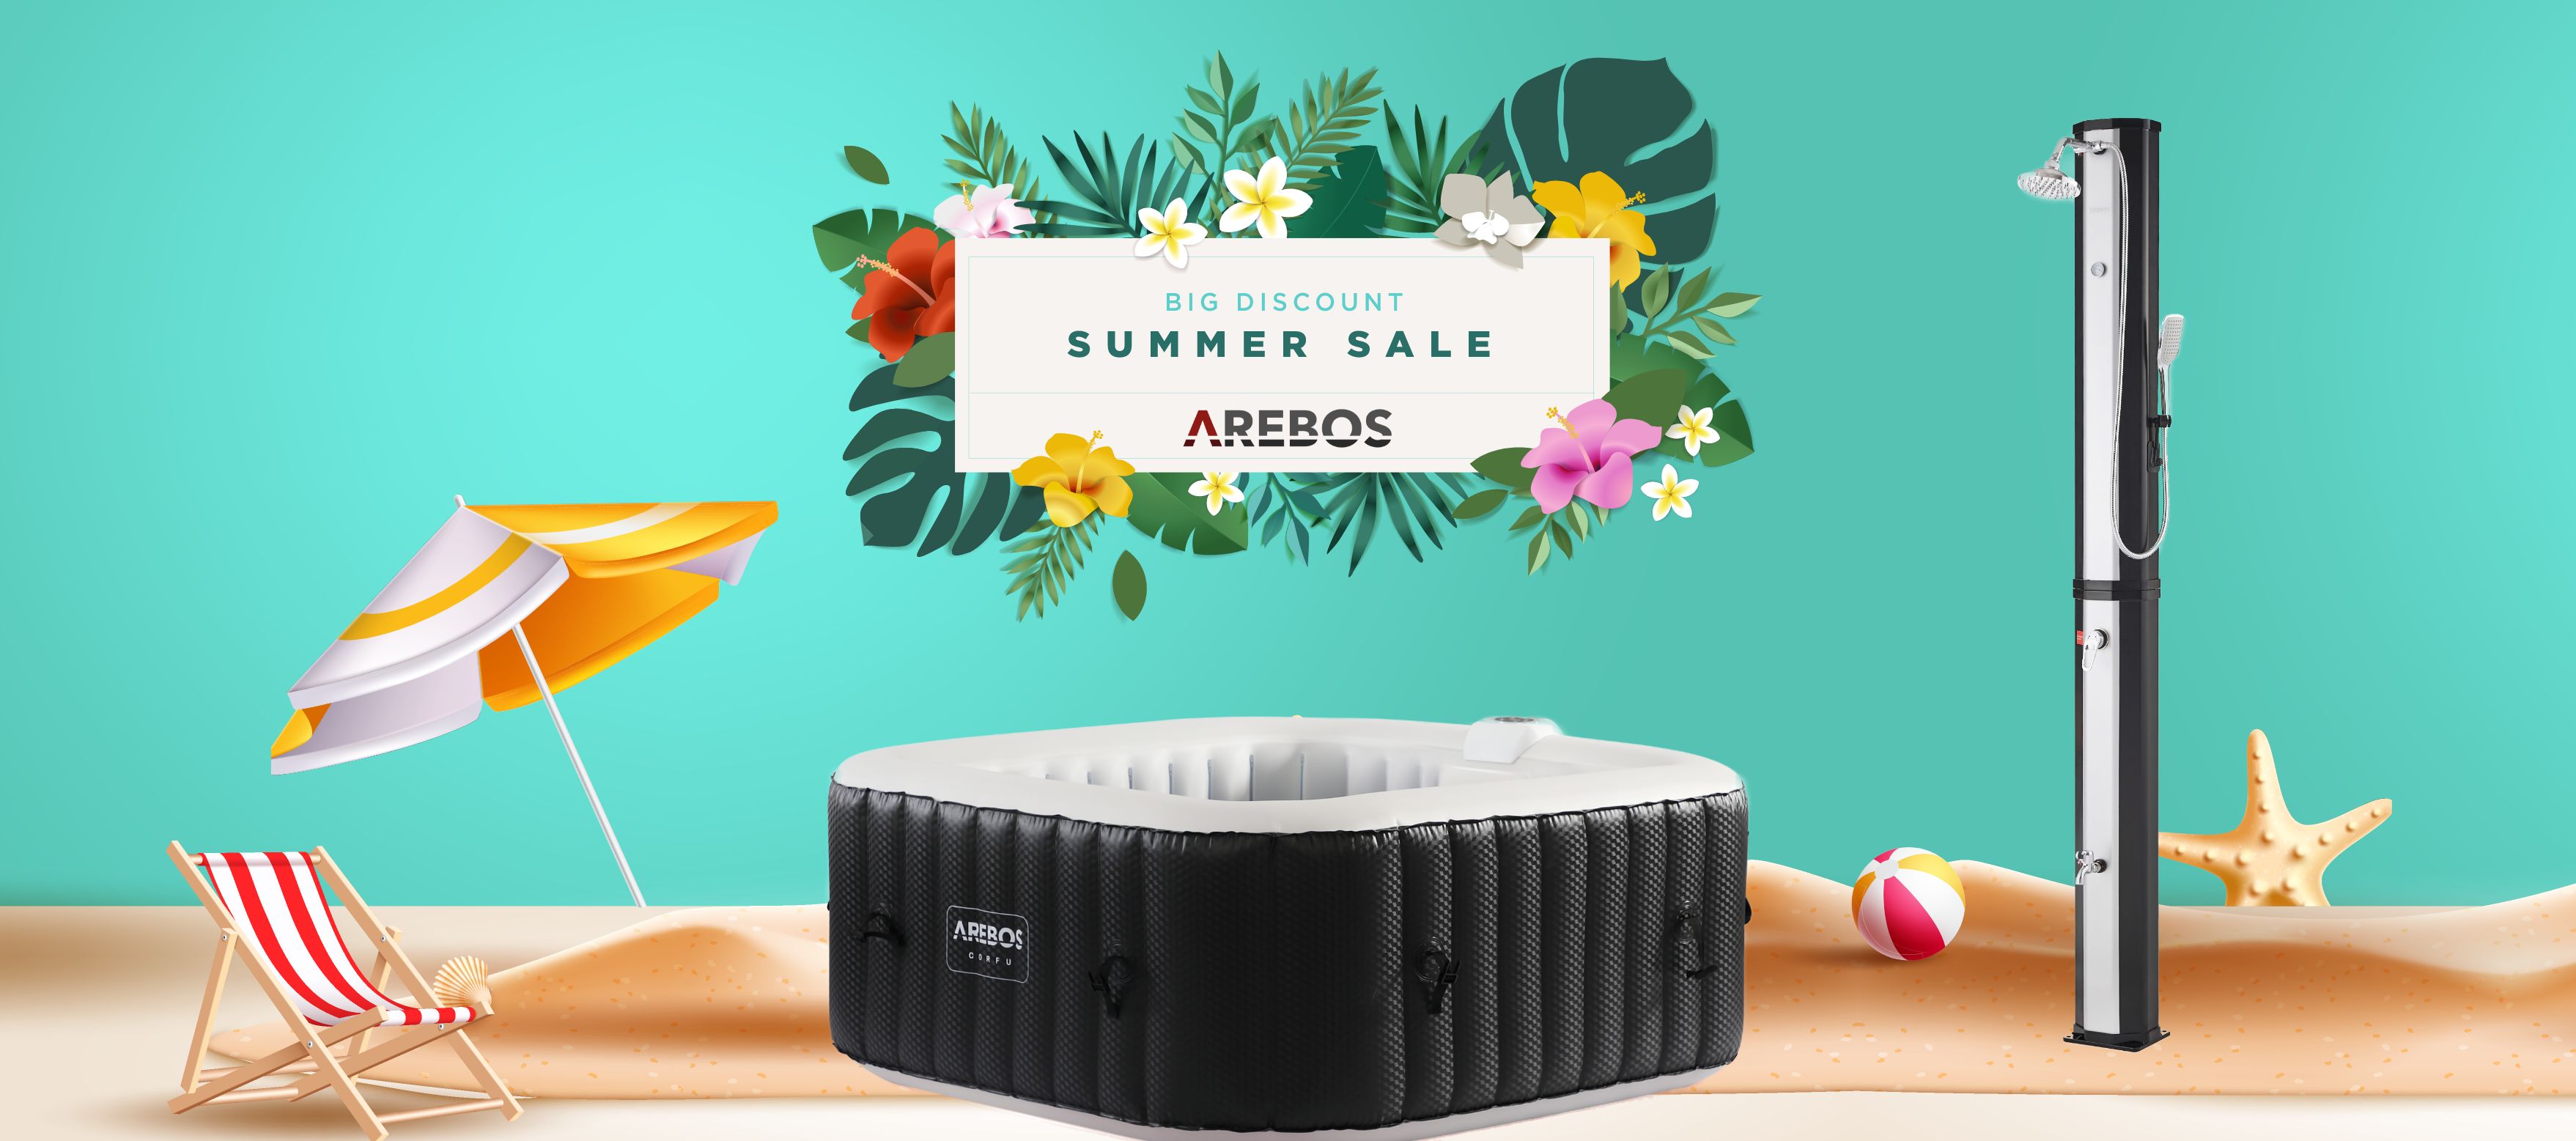 Arebos.co.uk - Home Page Top Slider